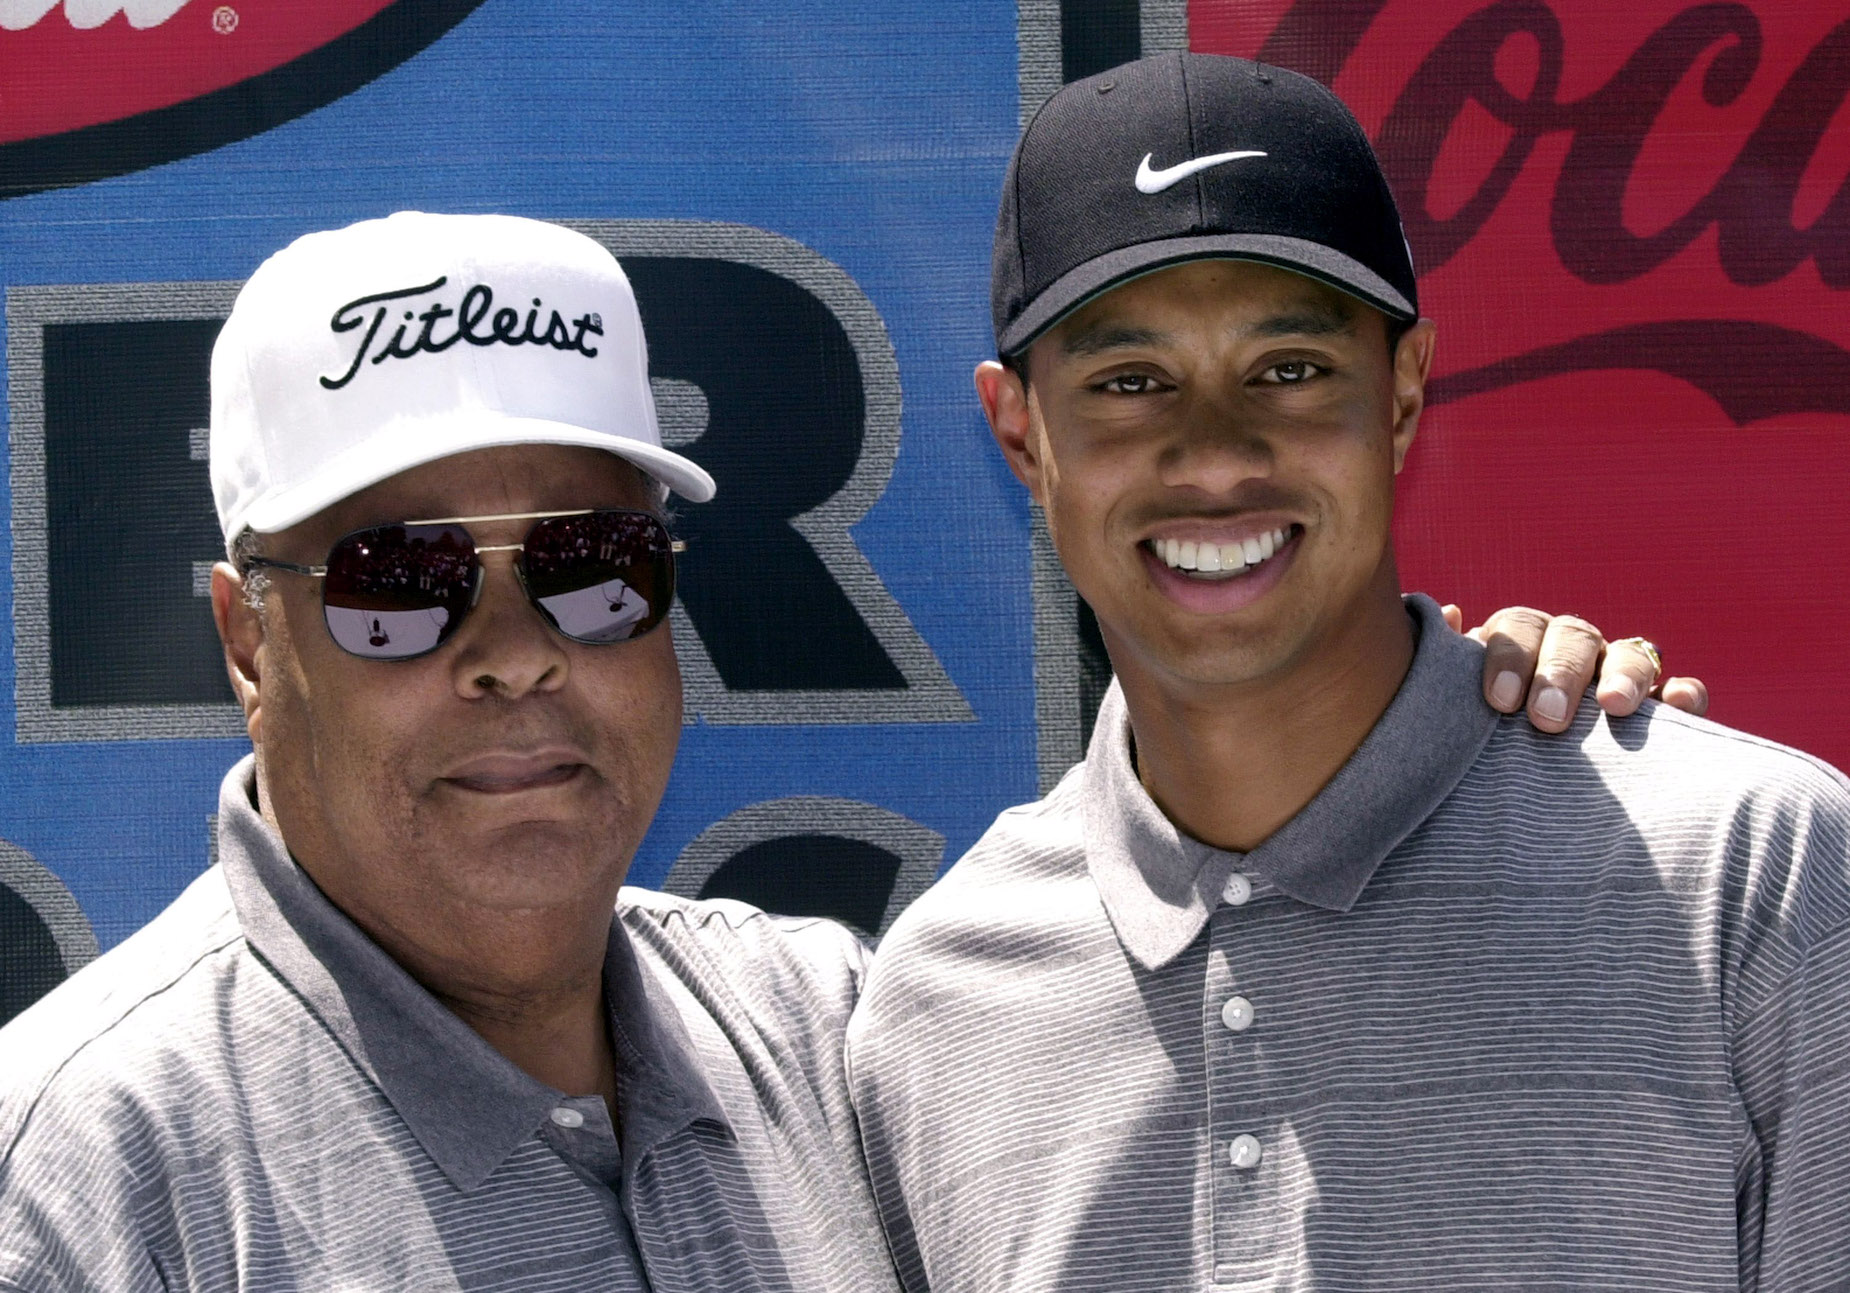 Tiger Woods is actually named after his father's long-lost buddy from Vietnam.